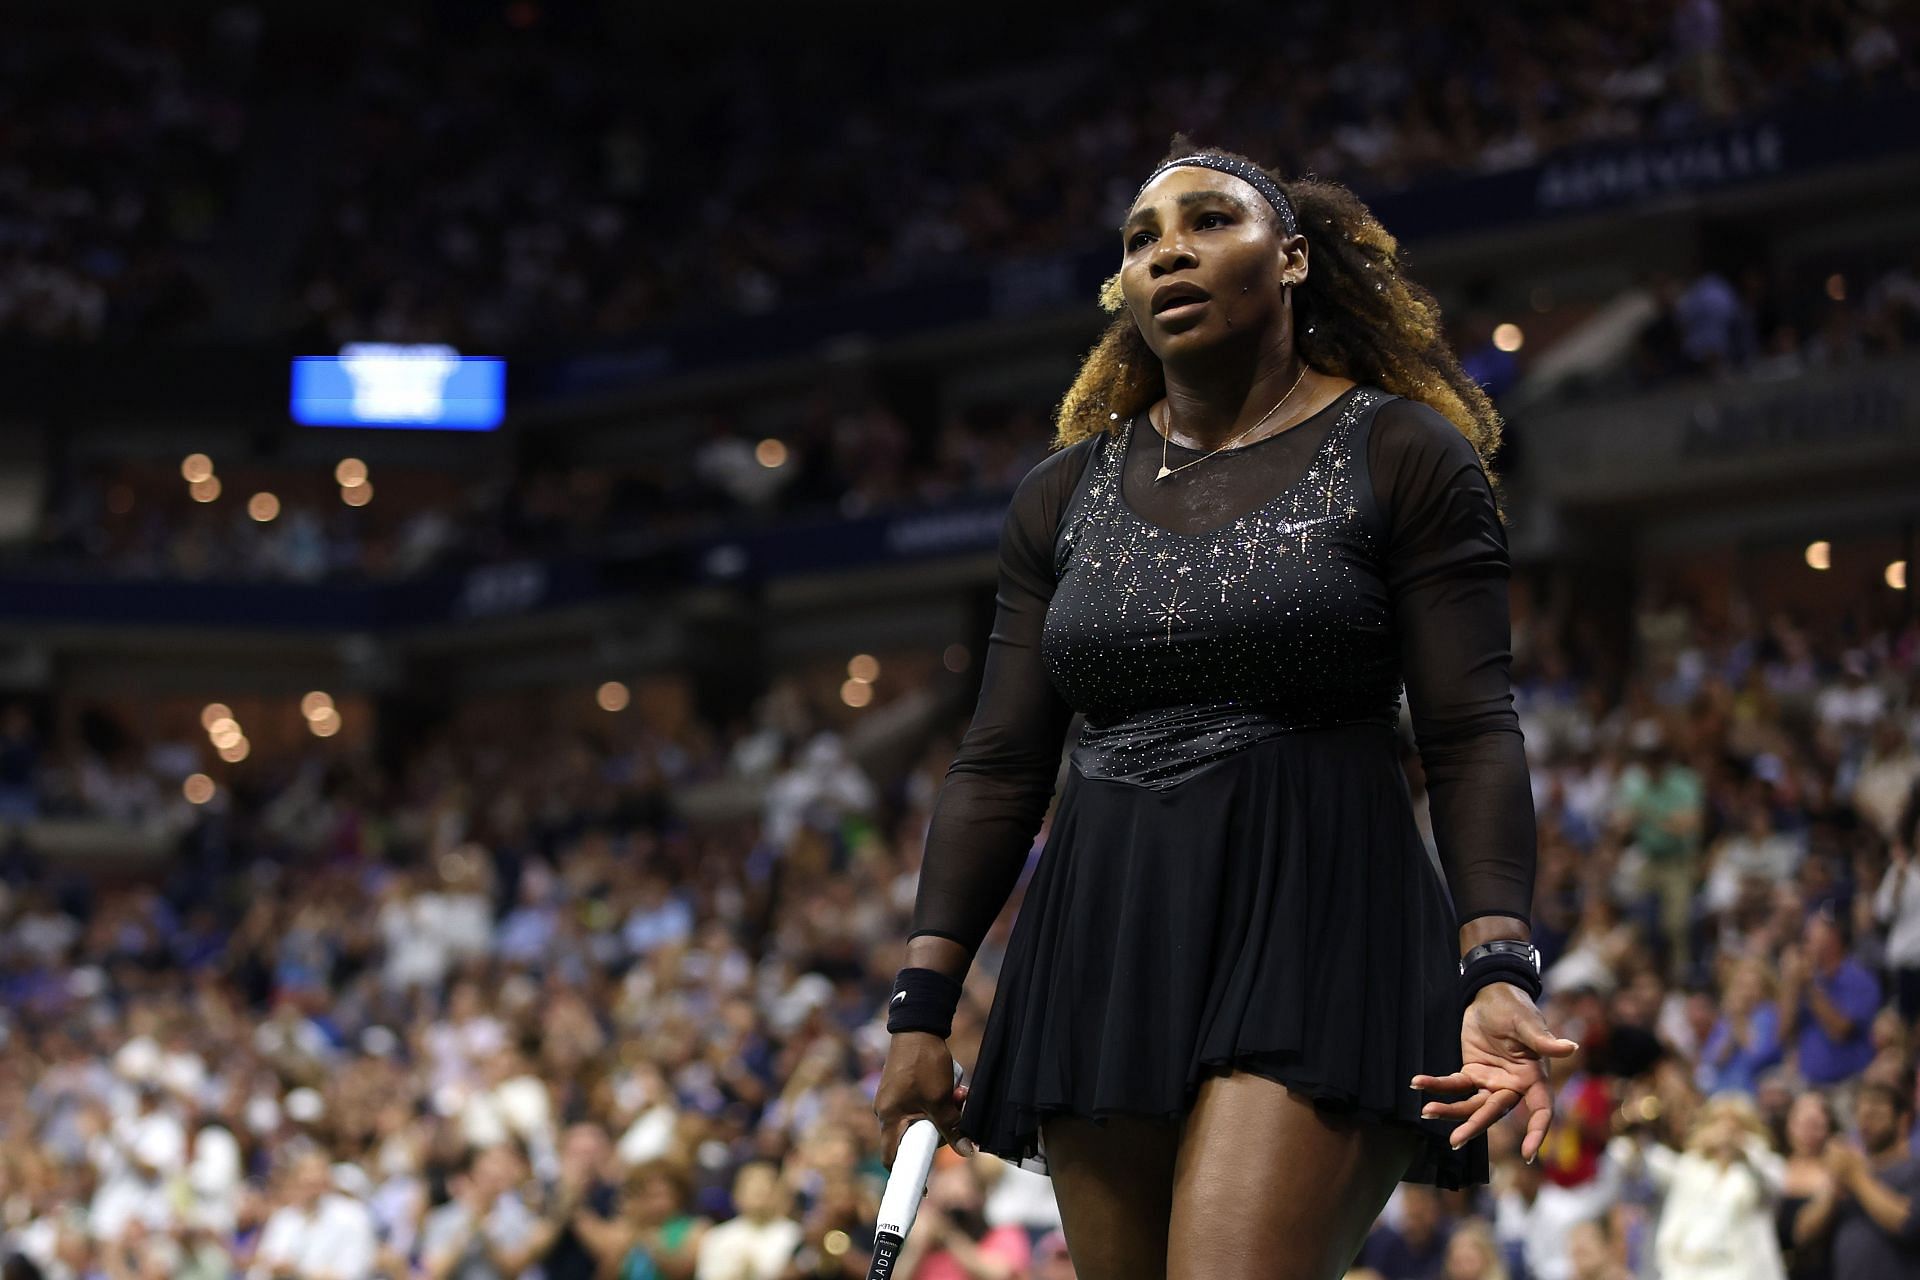 Serena Williams during her match against Anett Kontaveit at the US Open